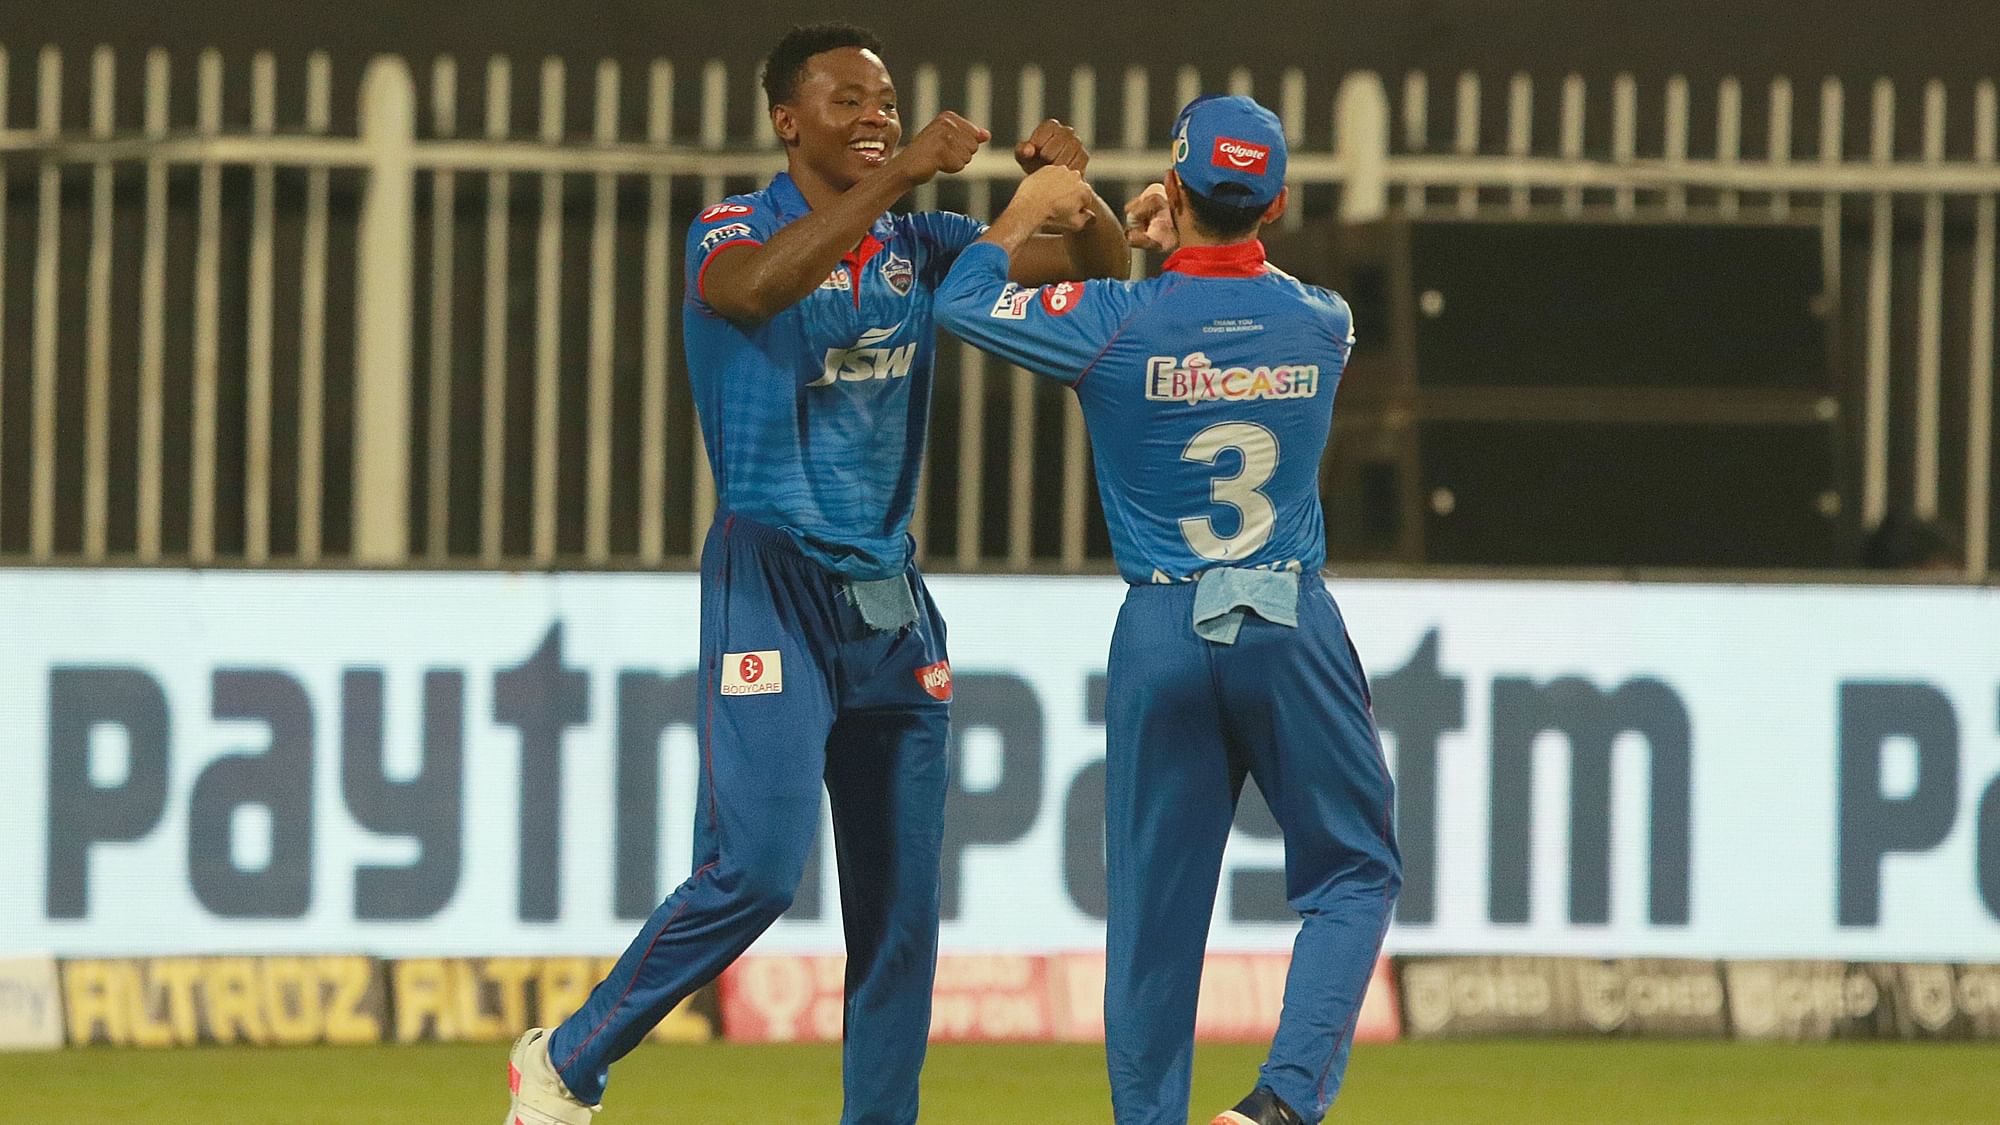 Delhi Capitals’ fast bowler Kagiso Rabada consolidated his hold on the Purple Cap with 3 more wickets, taking his tally to 15 wickets